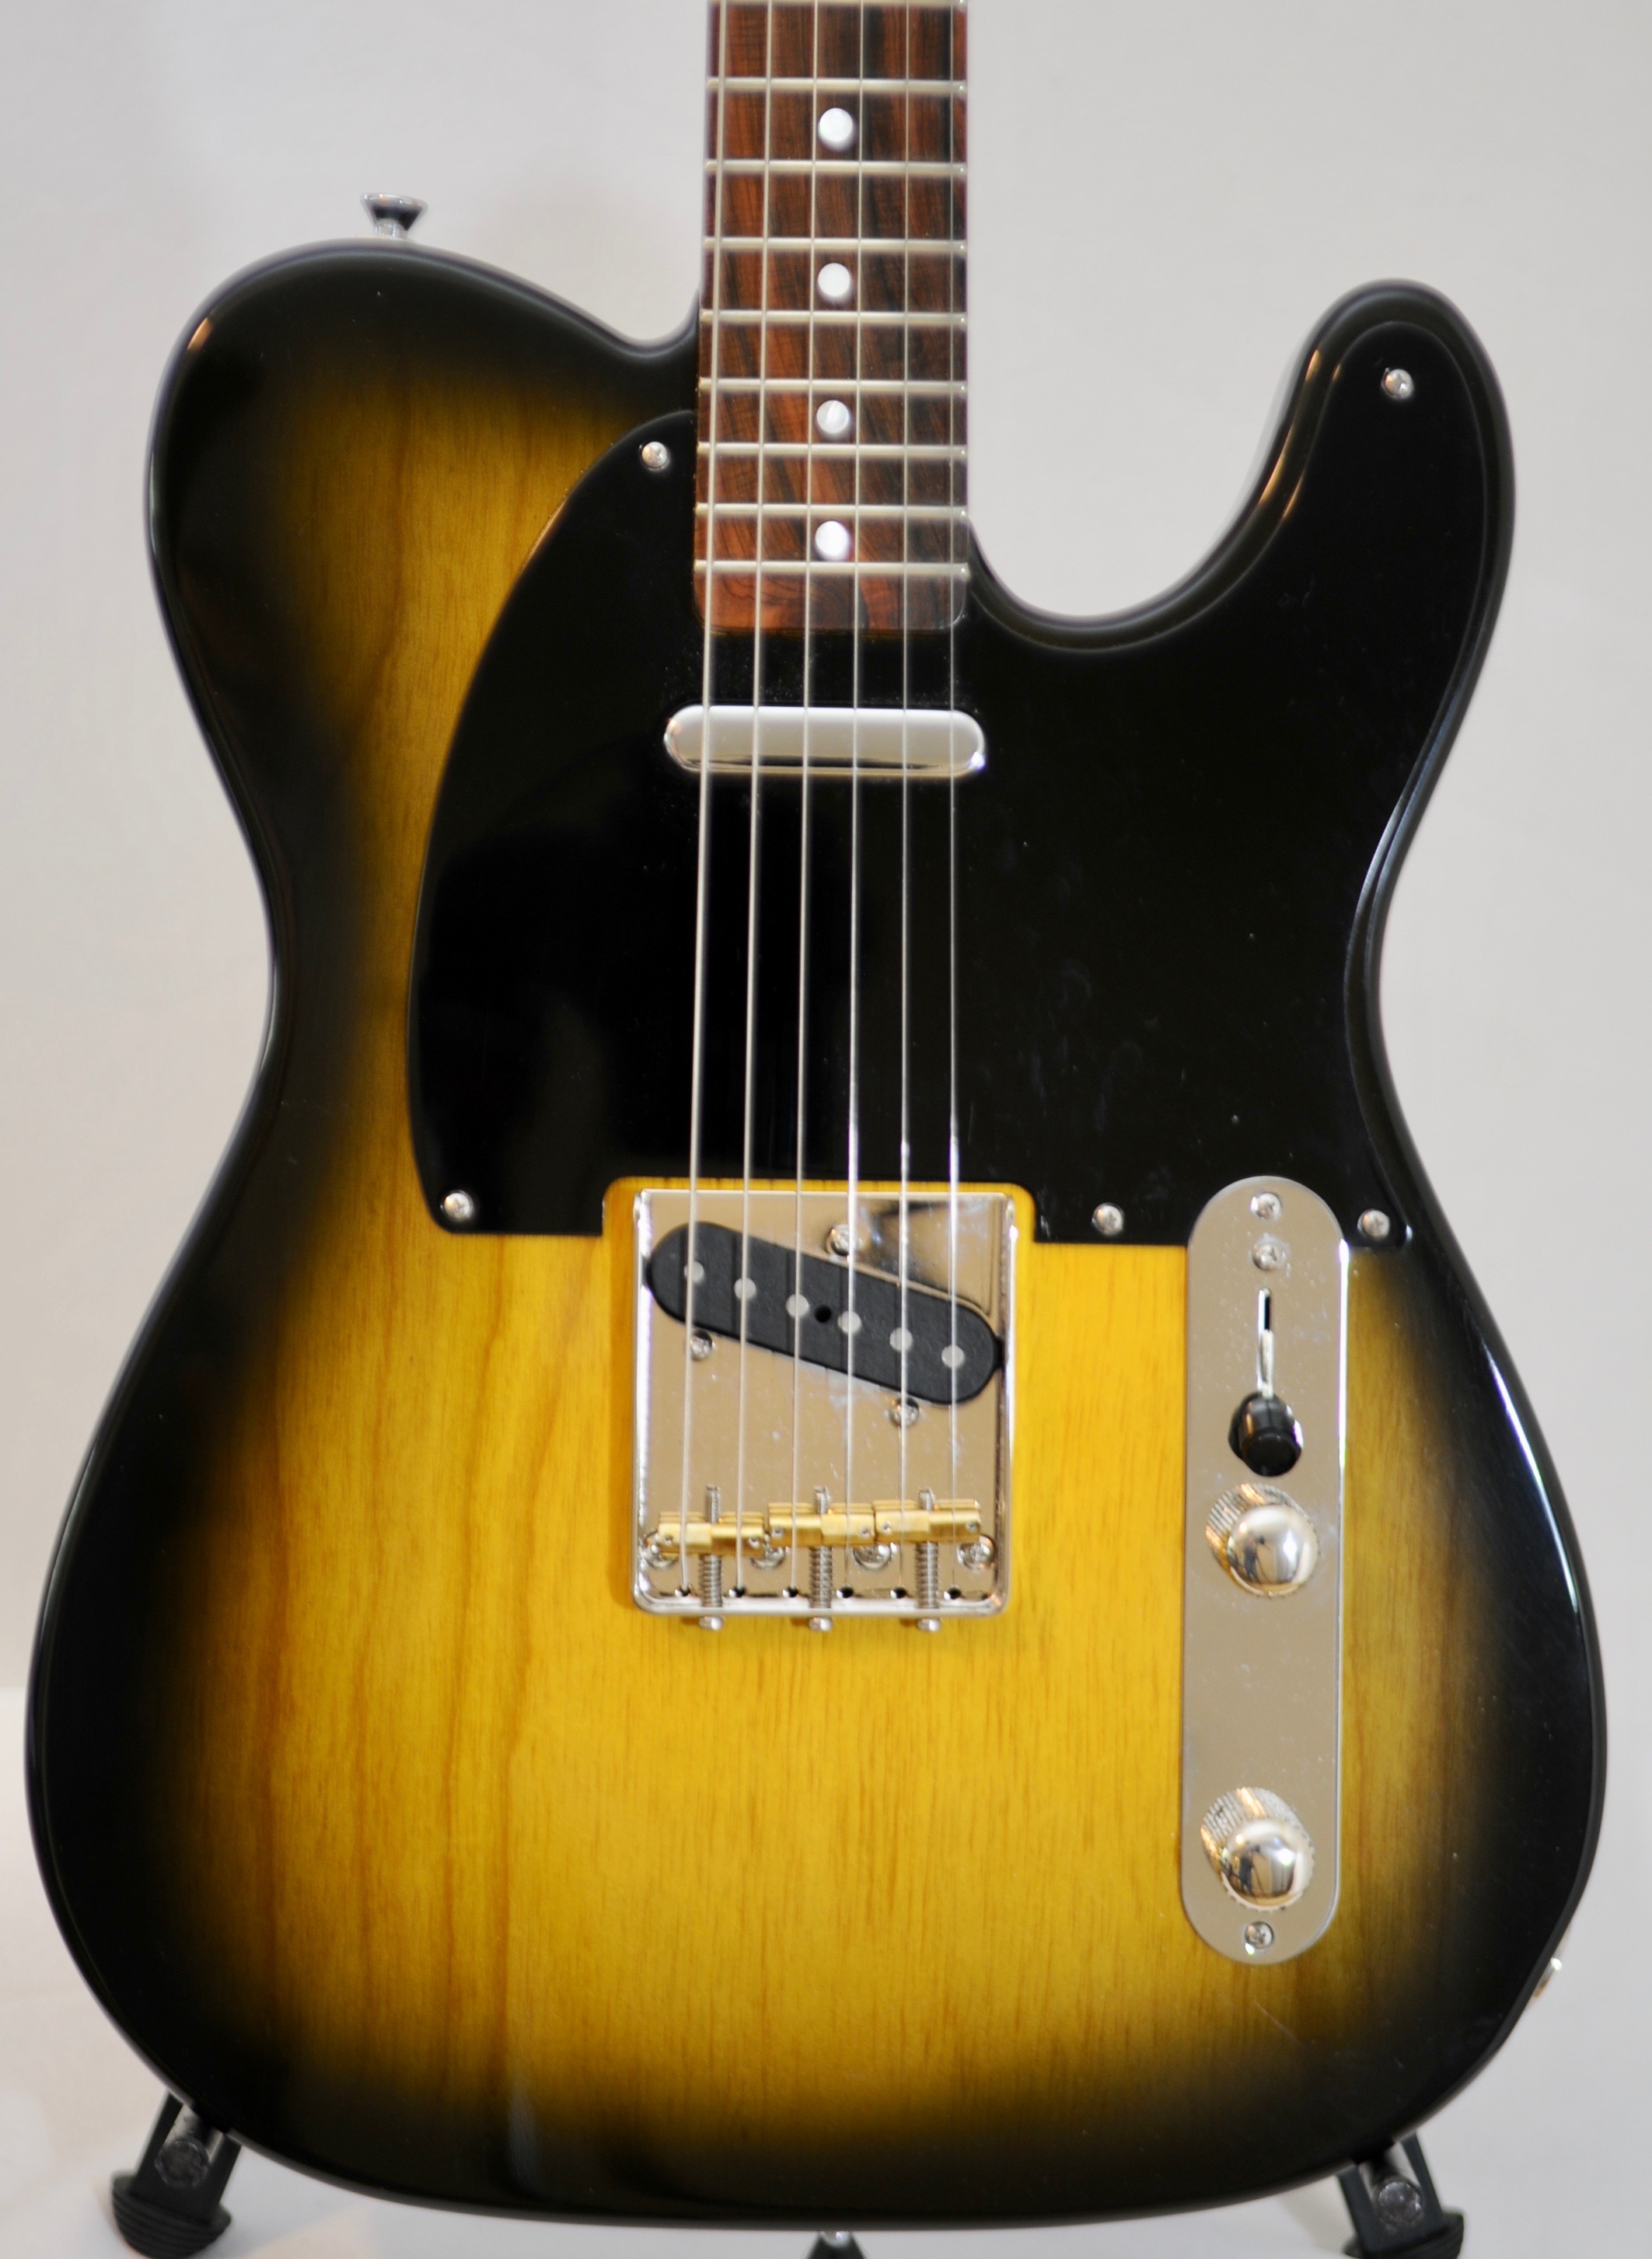 Sold | Product Types | Prime Guitars